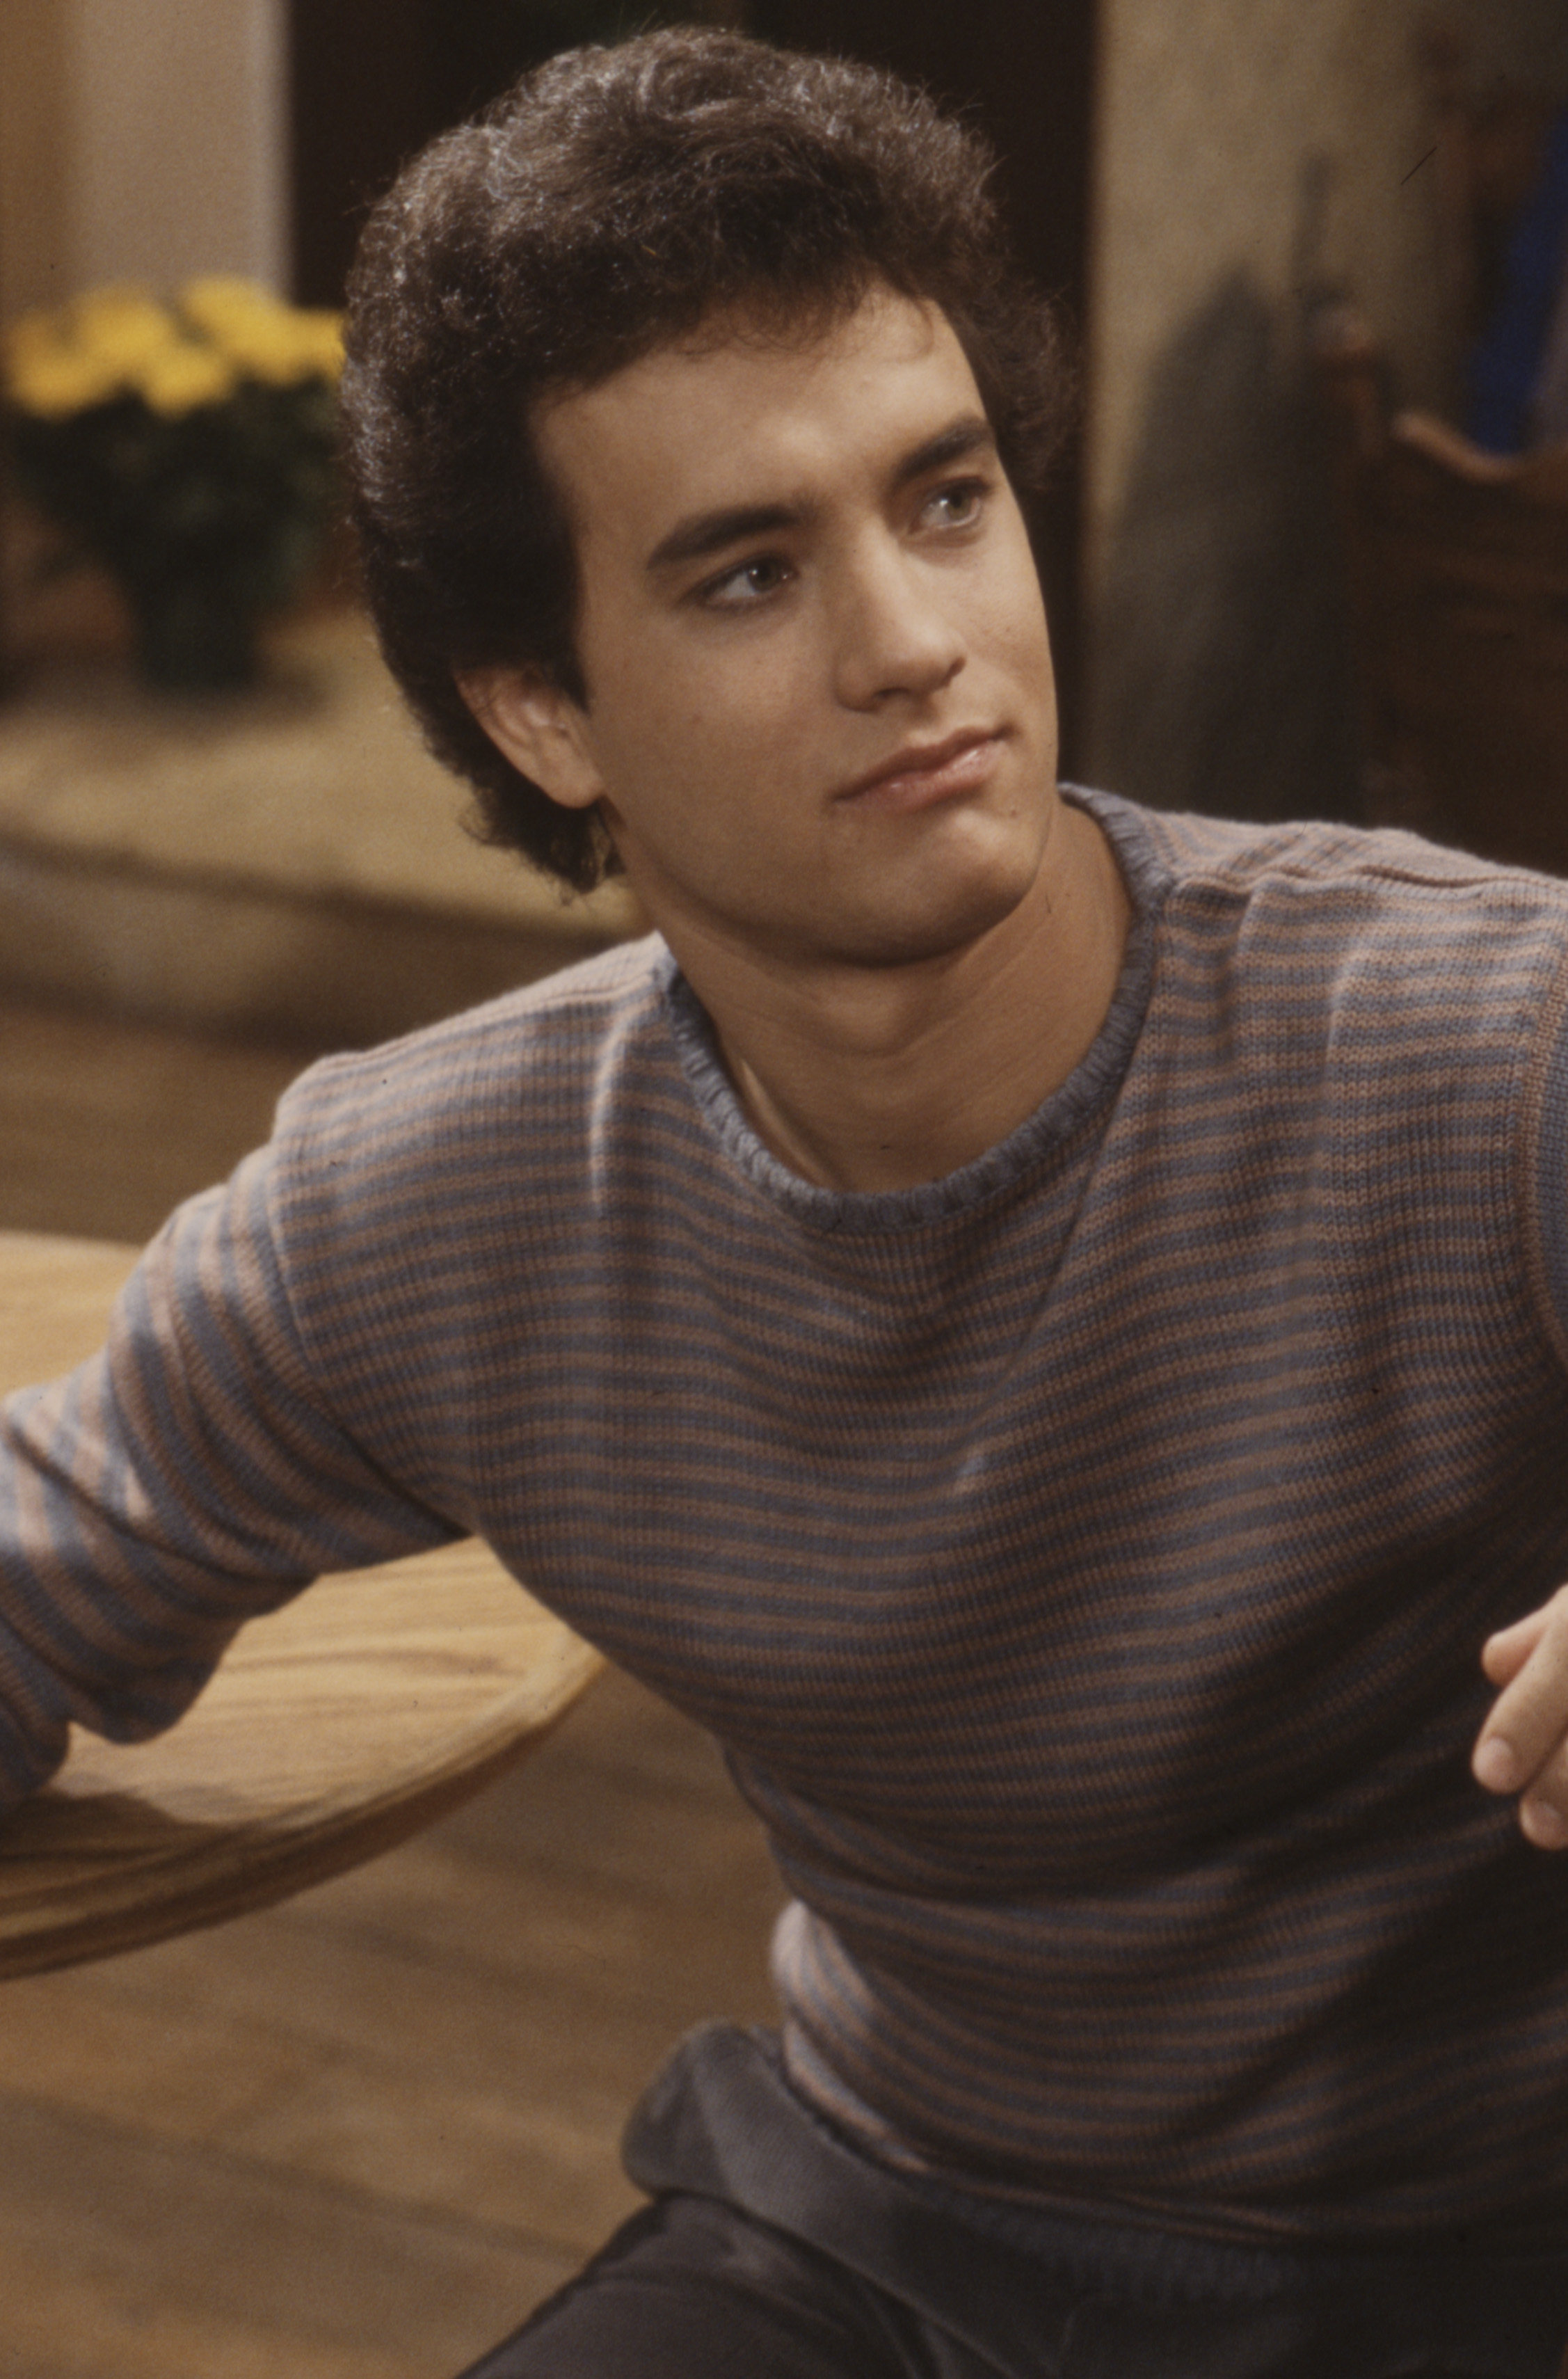 Tom Hanks in an episode of "Bosom Buddies" in Los Angeles, California in 1981 | Source: Getty Images